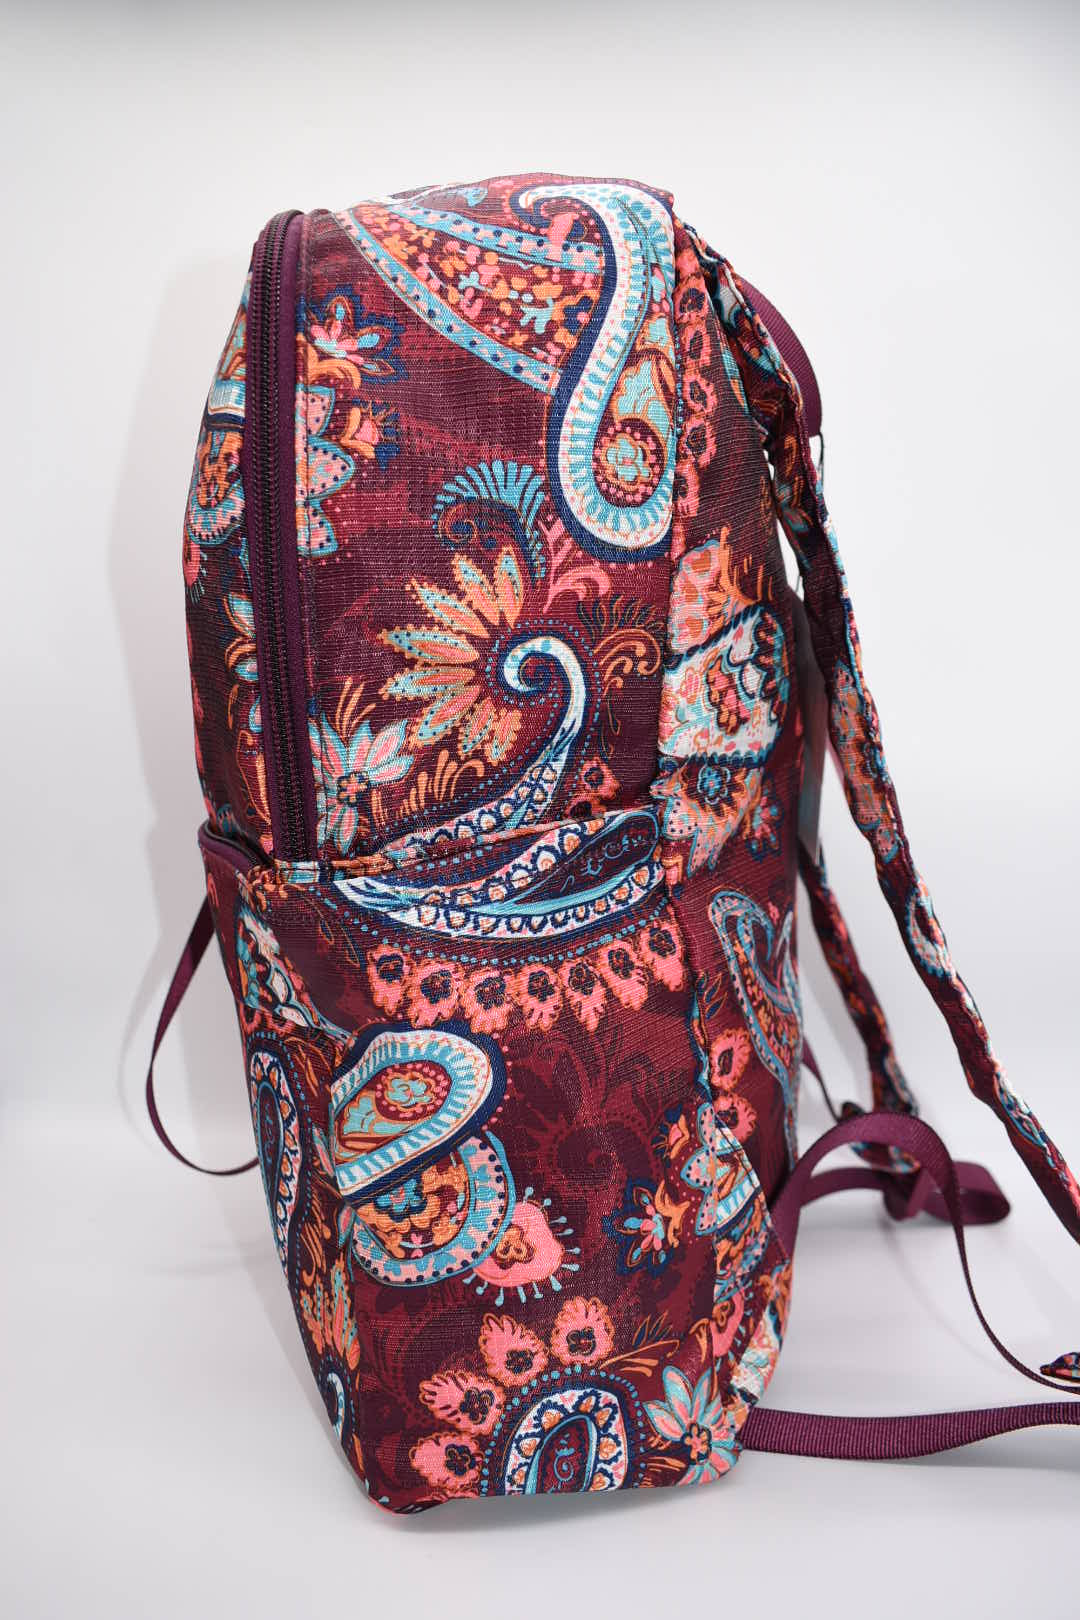 Vera Bradley ReACTIVE Ripstop Backpack & Pouch in "Paisley Jamboree" Pattern